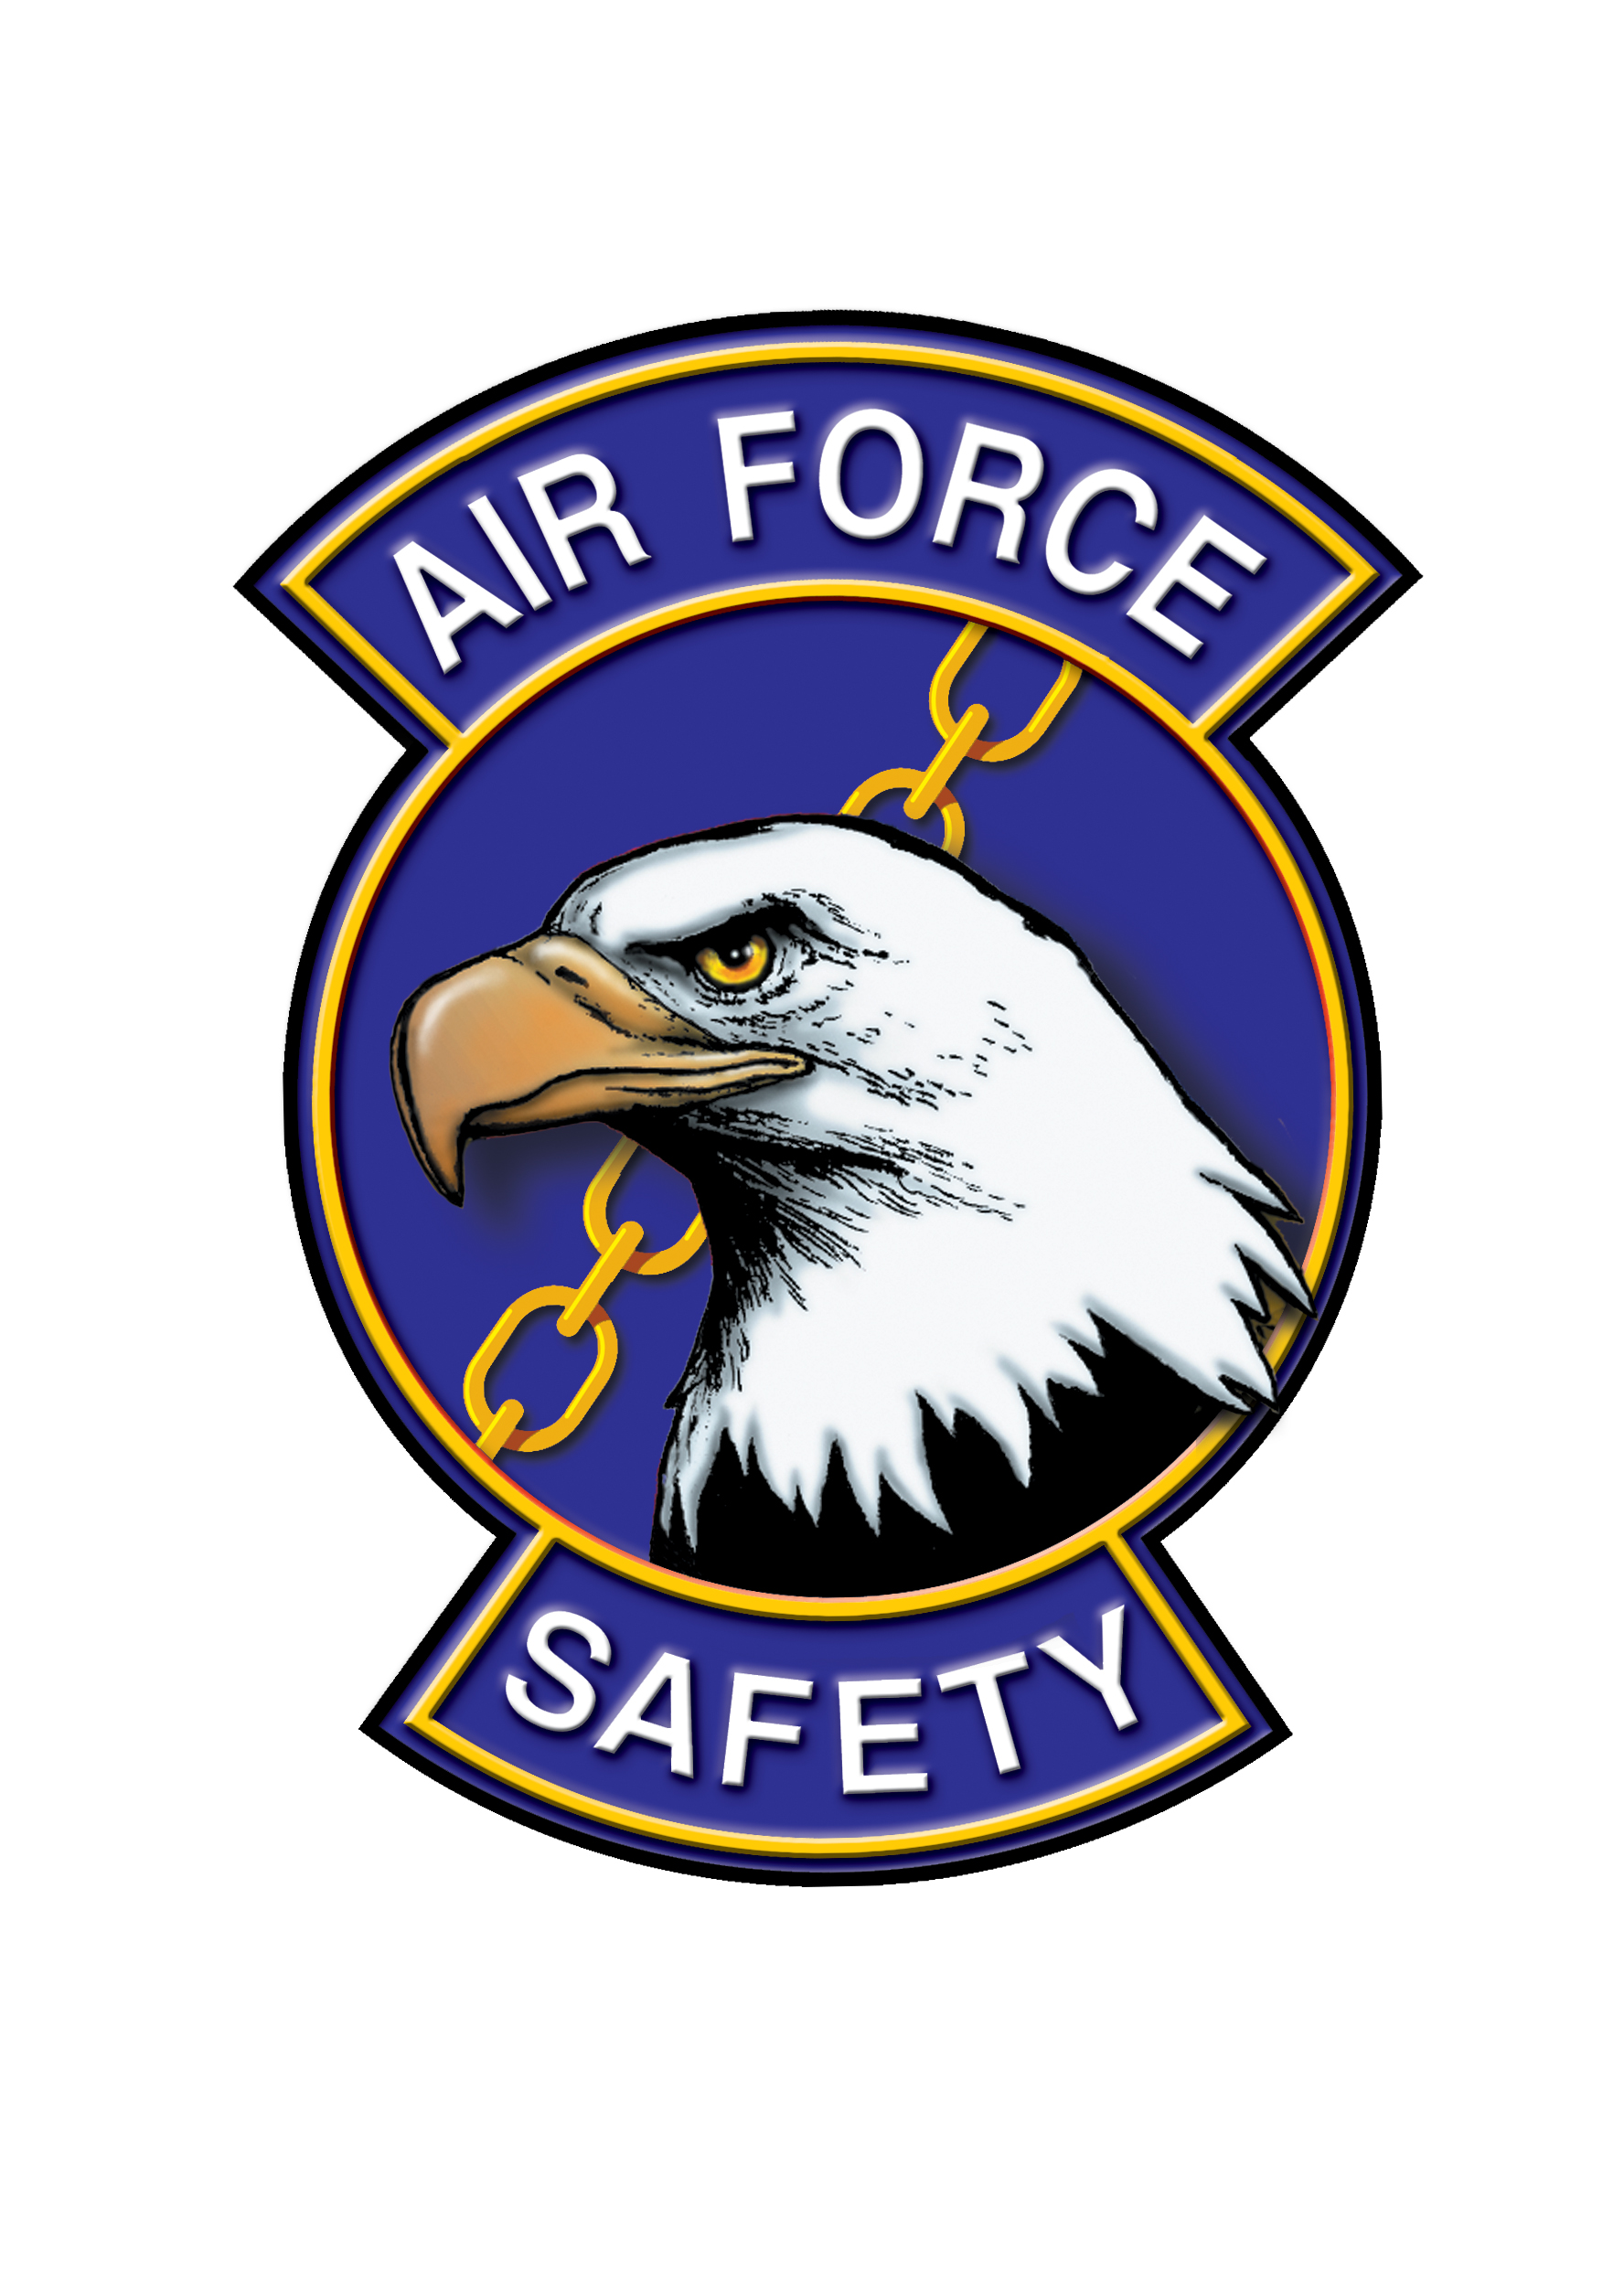 Ritual Verband andere air force safety patch Intim Einatmen Slowenien